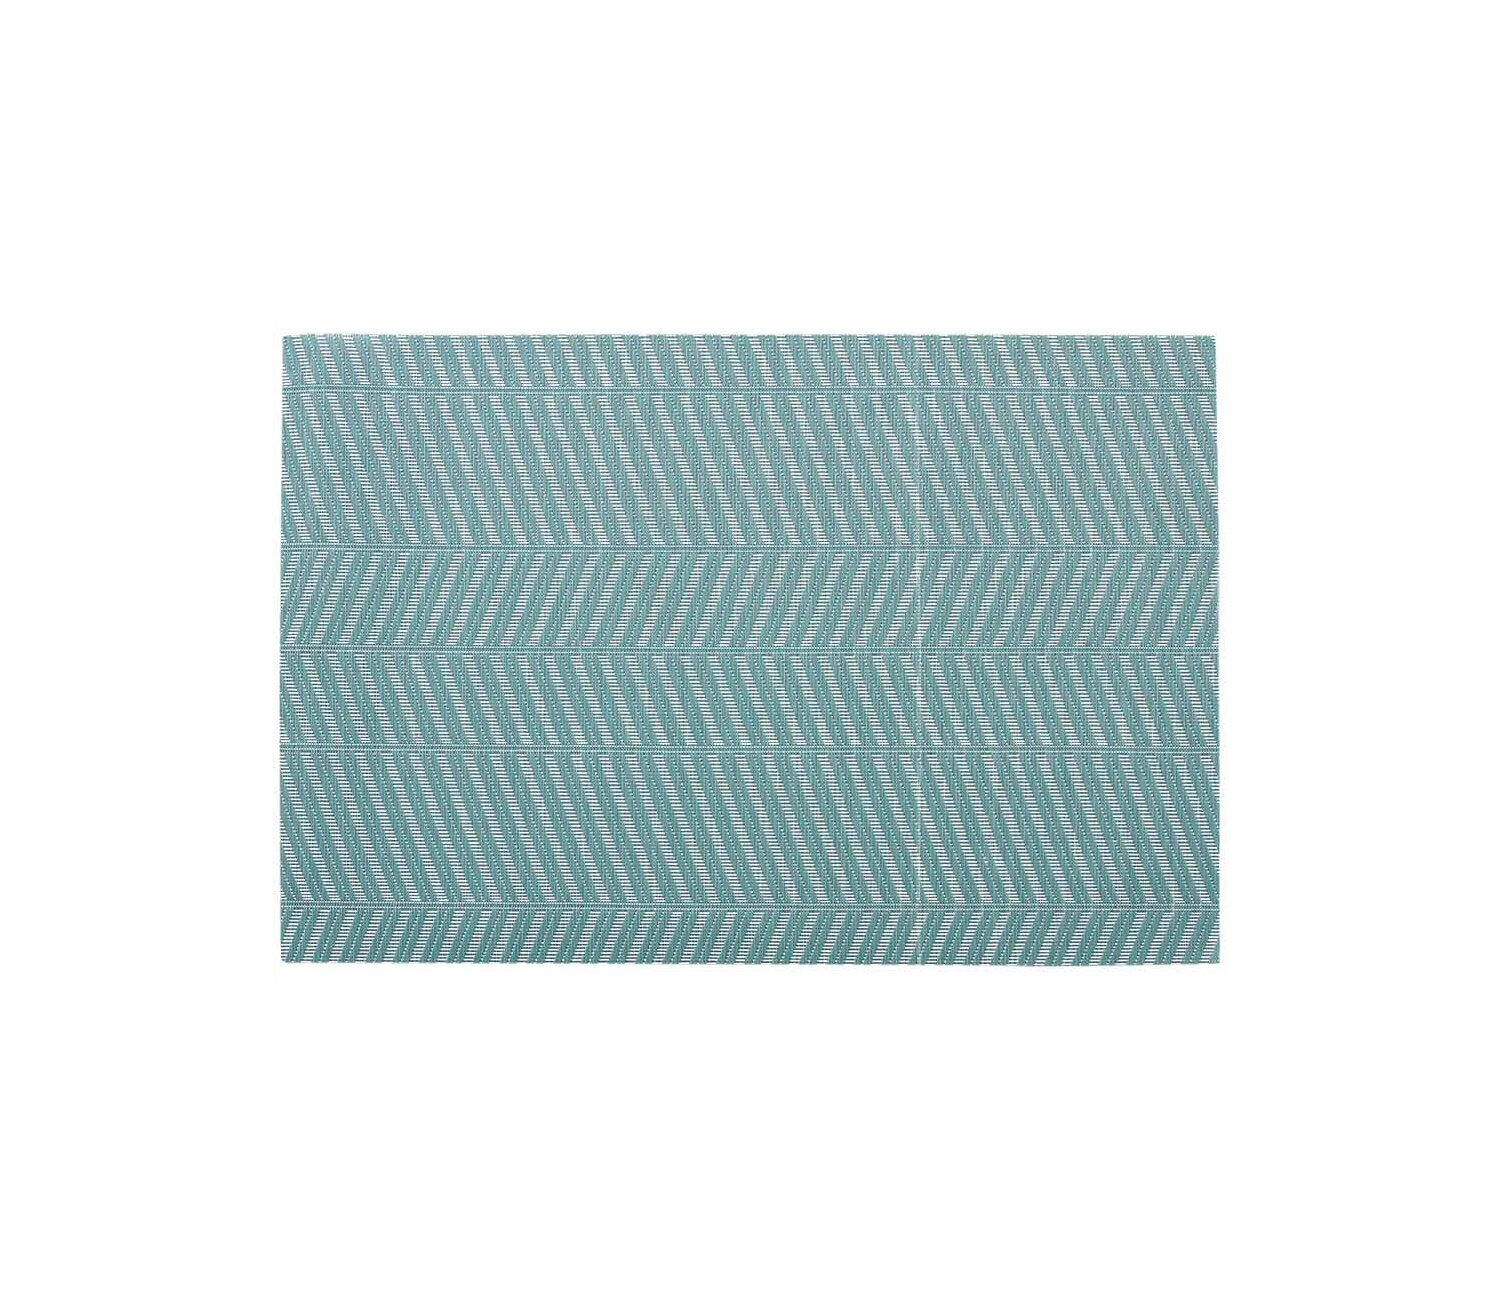 NEW Ladelle Fiesta Hex Printed Vinyl Placemat Set Teal 4pce 